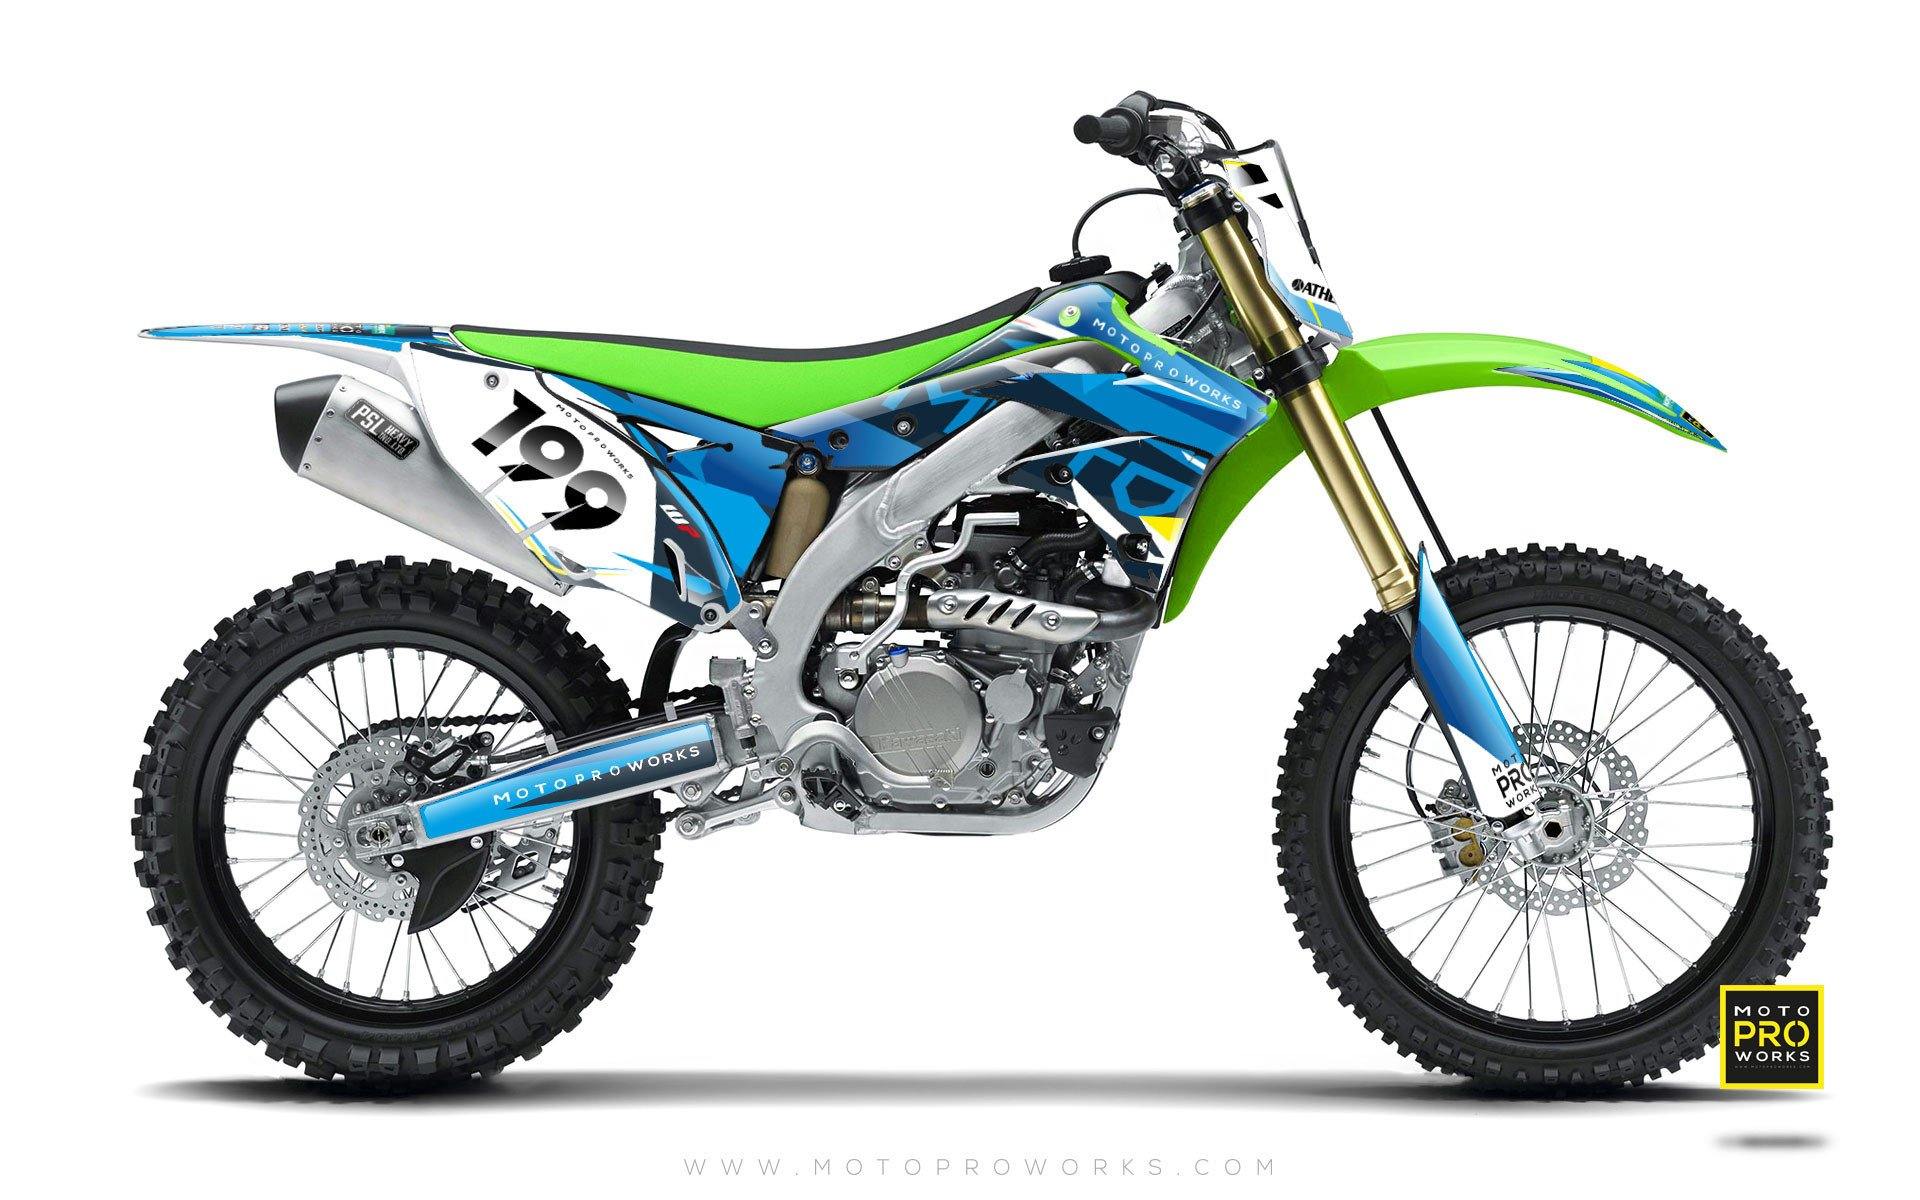 Kawasaki GRAPHIC KIT - "TECH9" (pacific) - MotoProWorks | Decals and Bike Graphic kit